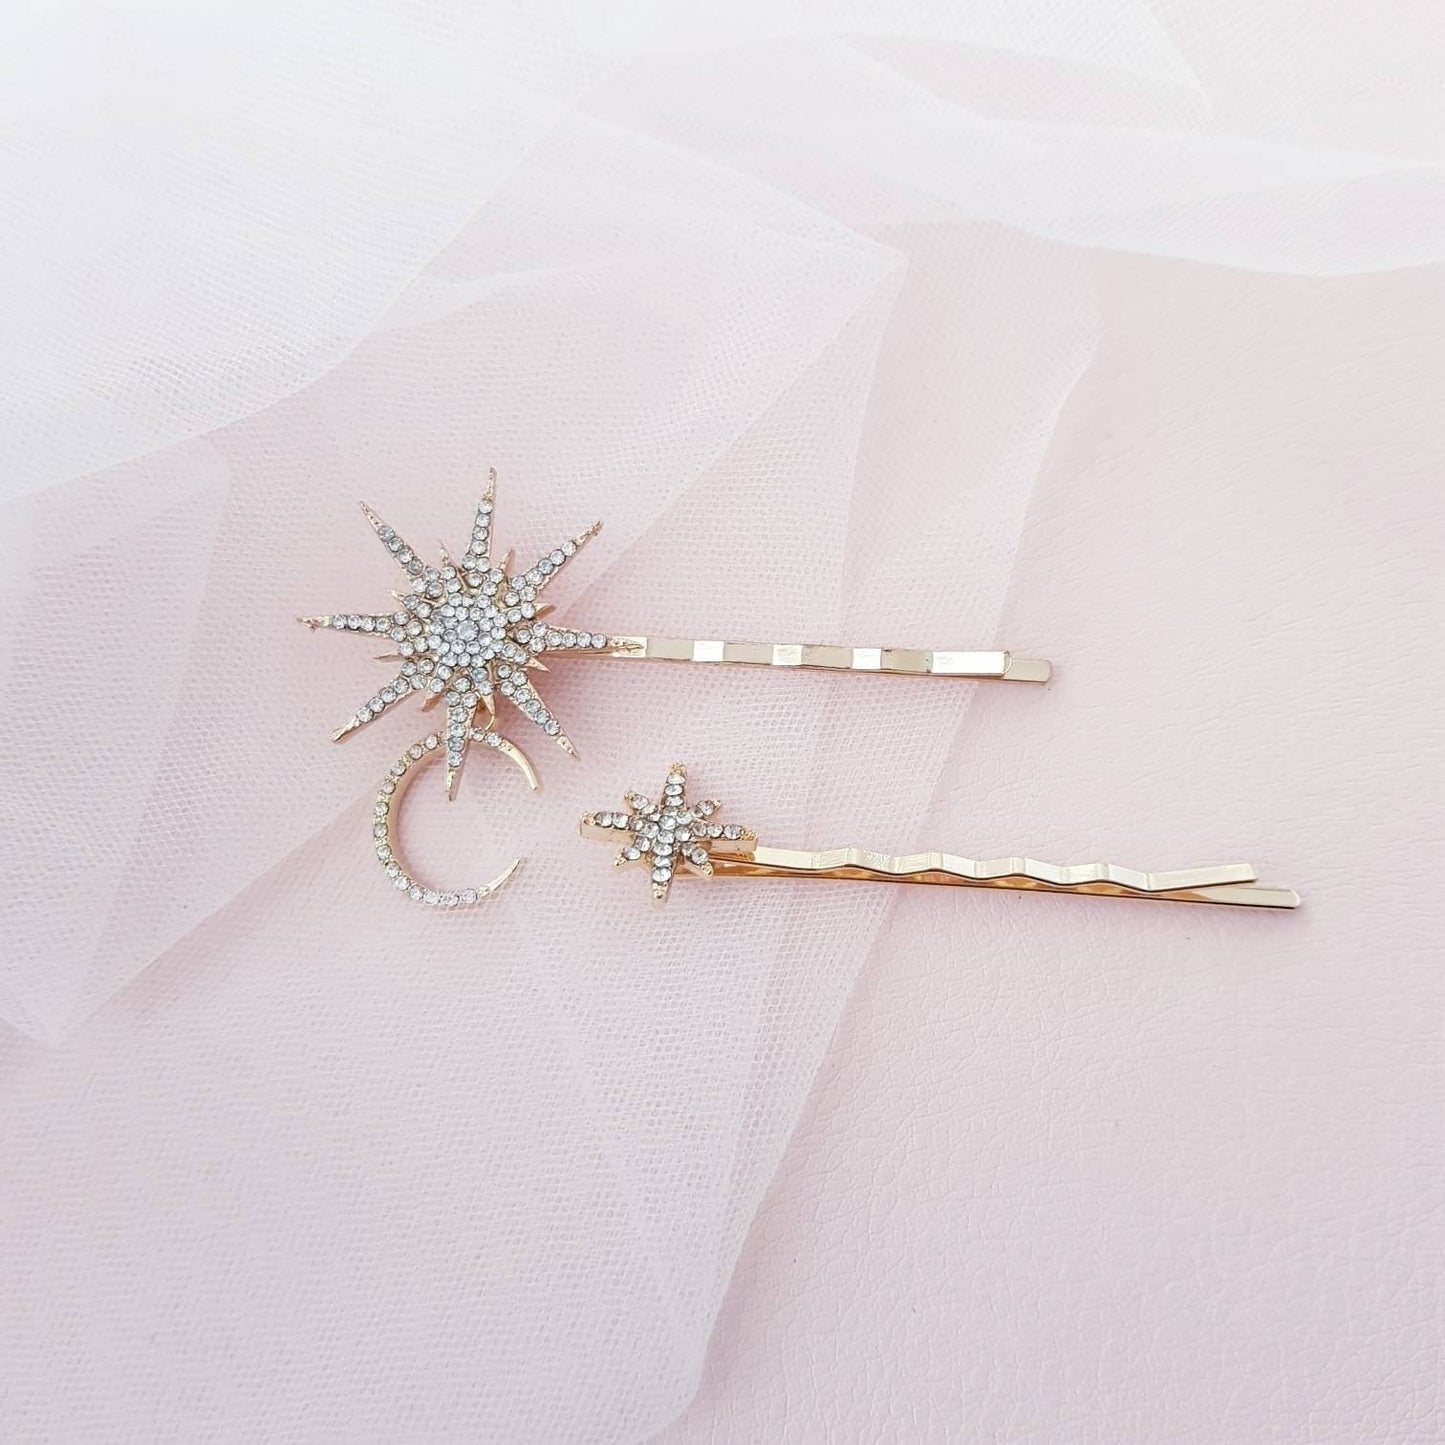 BoutiquebyBrendaLee CÉLESTE set of 2 gold-toned bobby pins wedding bridal constellation moon star celestial hair accessories unique